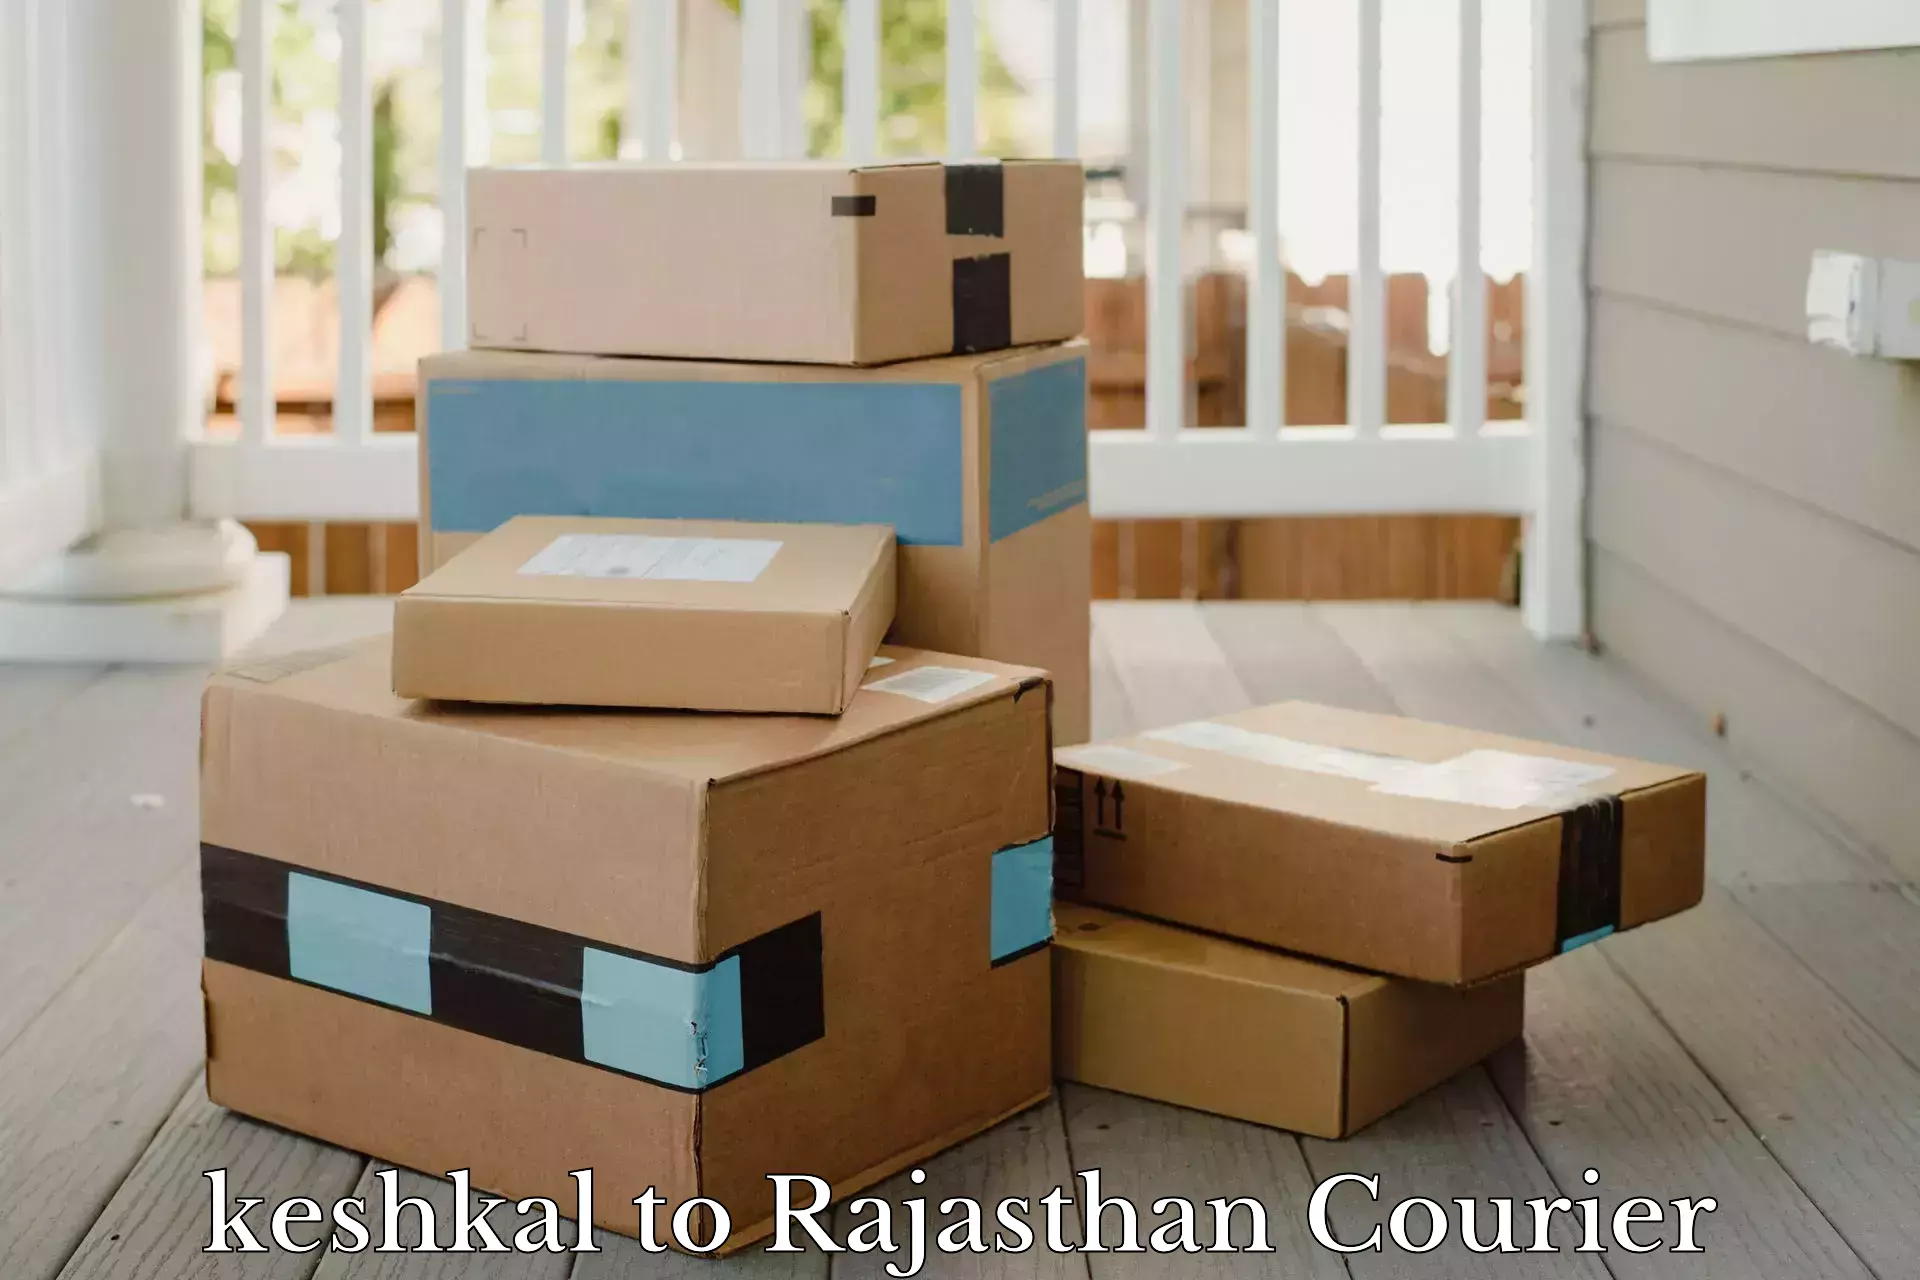 Express delivery capabilities keshkal to Bari Dholpur